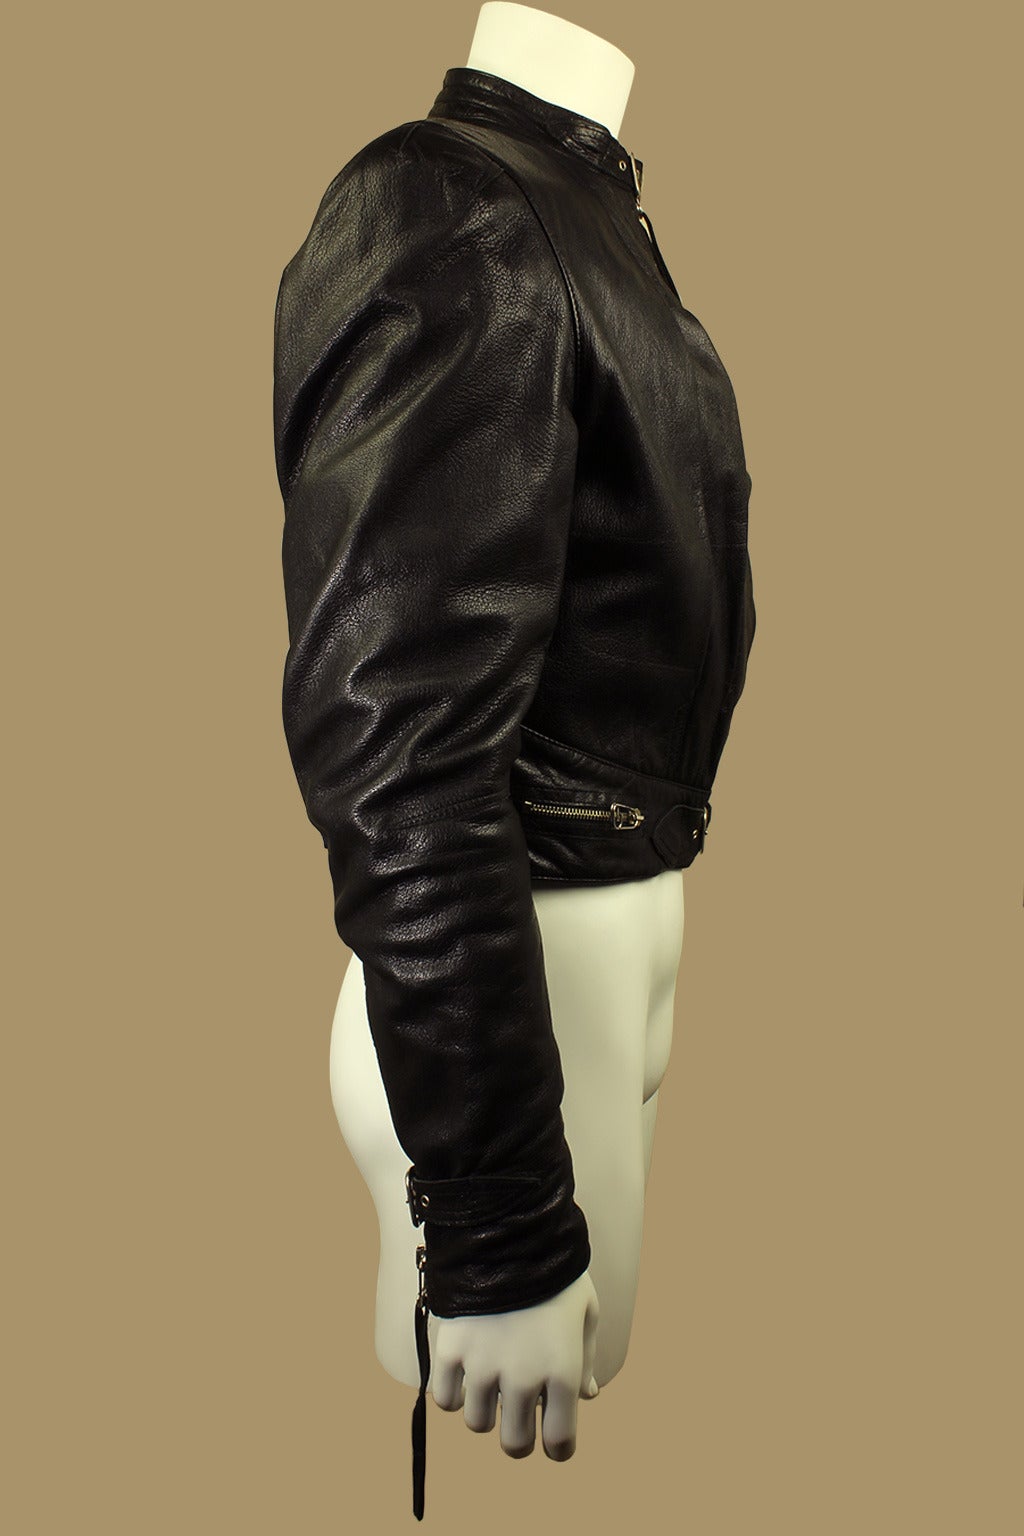 There are incredible details in the design of this motorcycle jacket. There are functional buckles at the high neck and waist. The body has three flat pleats adorning the front plus two low slash zippered pockets. The sleeves have a tasseled zipper